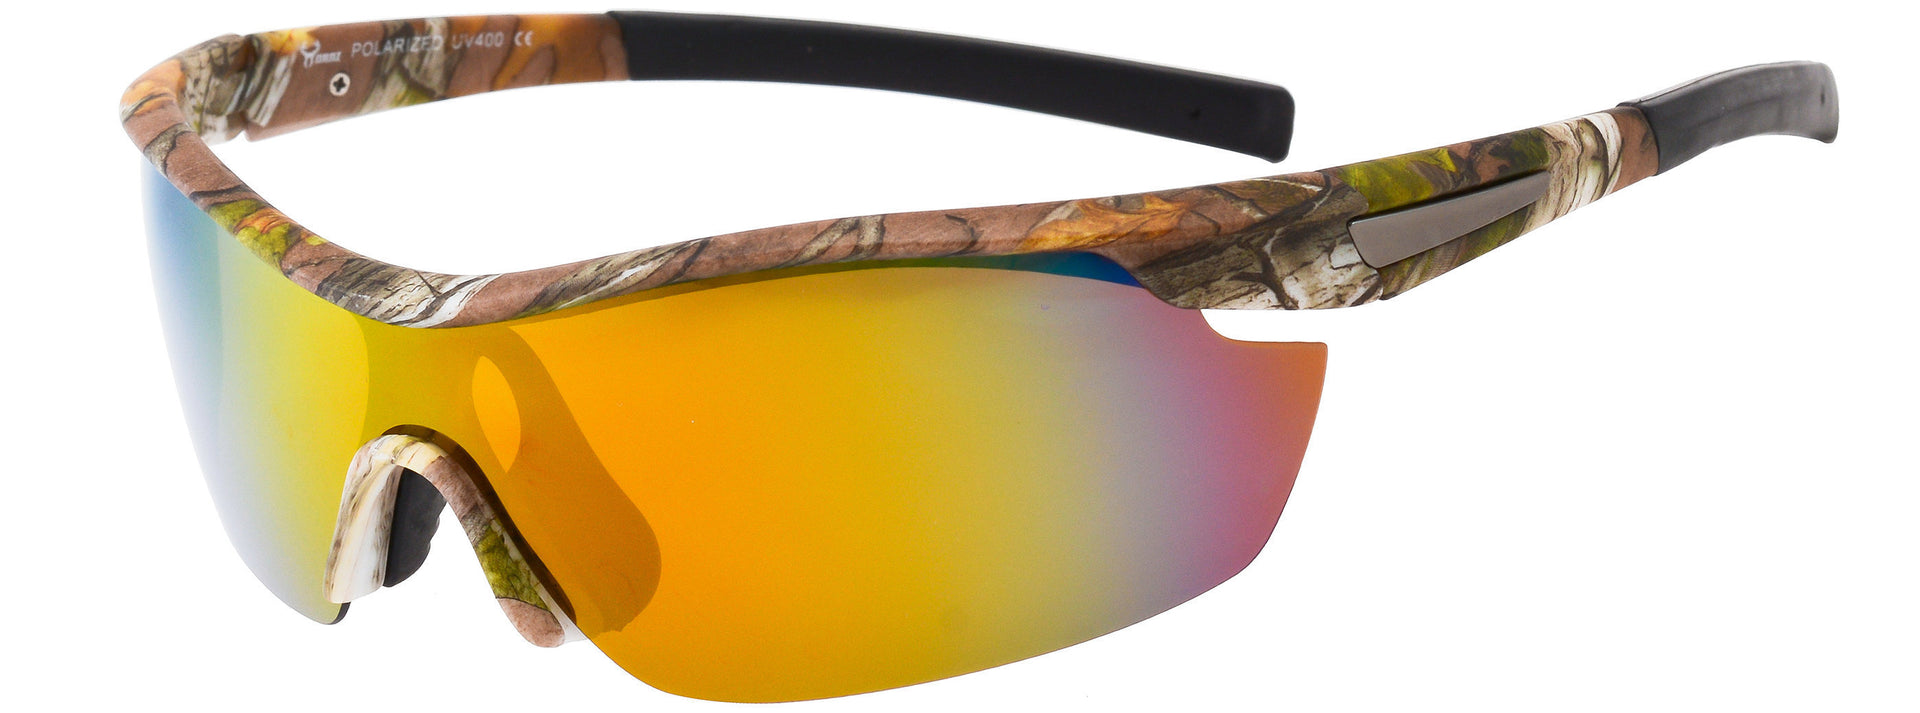 Hornz Brown Forest Camouflage Polarized Sunglasses for Men Full Frame  Strong Arms & Free Matching Microfiber Pouch – Brown Camo Frame - Smoke Lens  – Hornz Camo